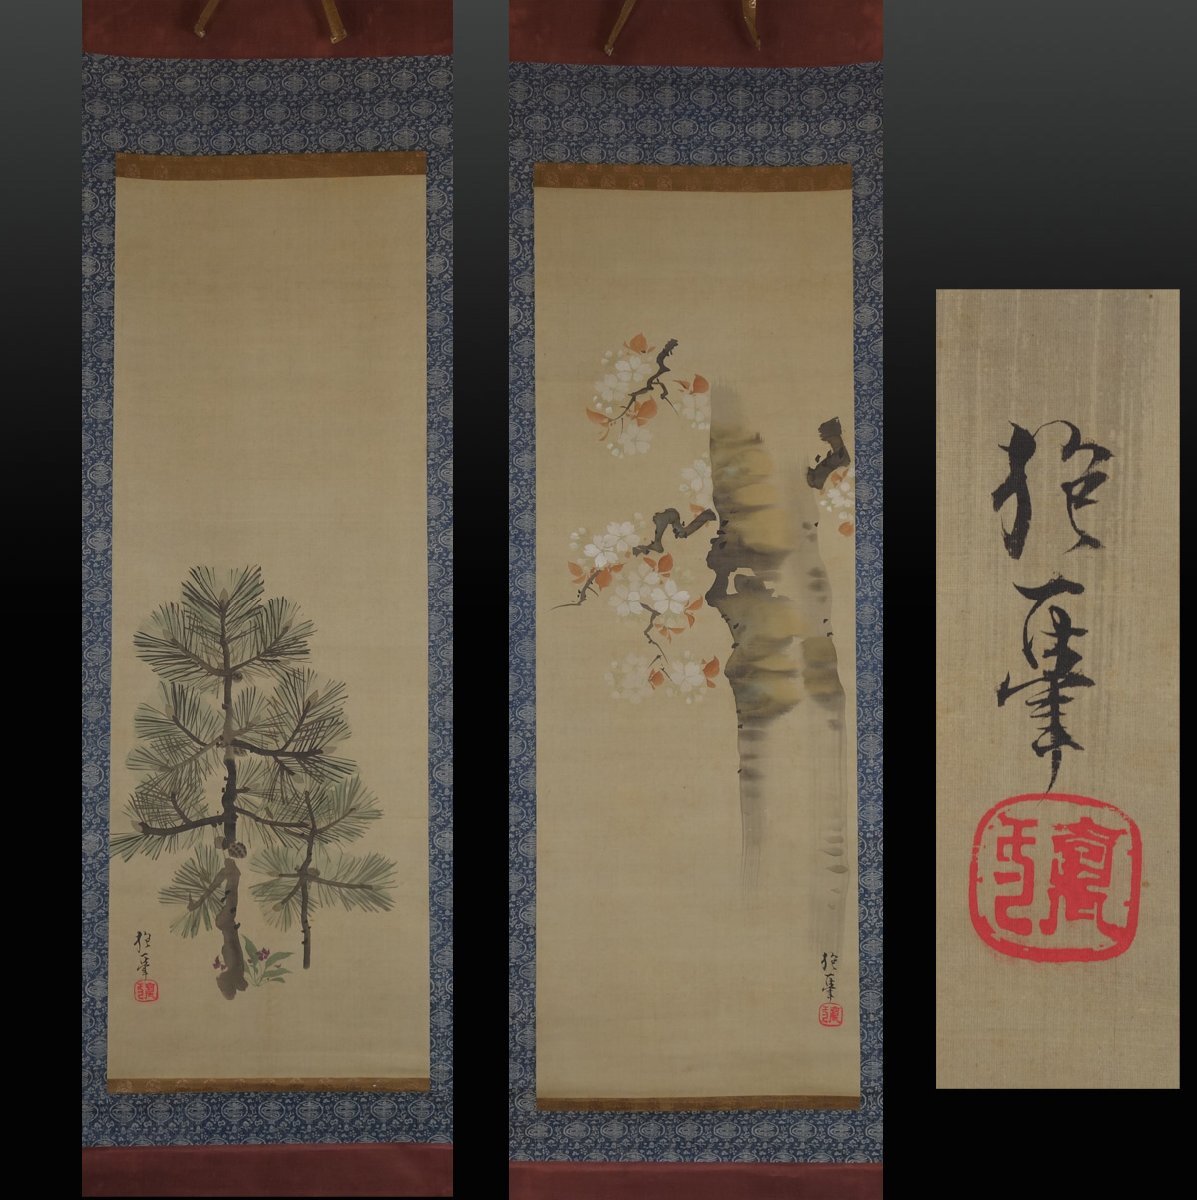 [Copy] Storehouse pot ◆ Sakai Hoitsu Cherry Blossom Pines Double width Old handwriting Old document Old book Ink painting Japanese painting Flower and bird painting Literati painting Edo painting Rimpa Tea hanging scroll, painting, Japanese painting, landscape, Fugetsu